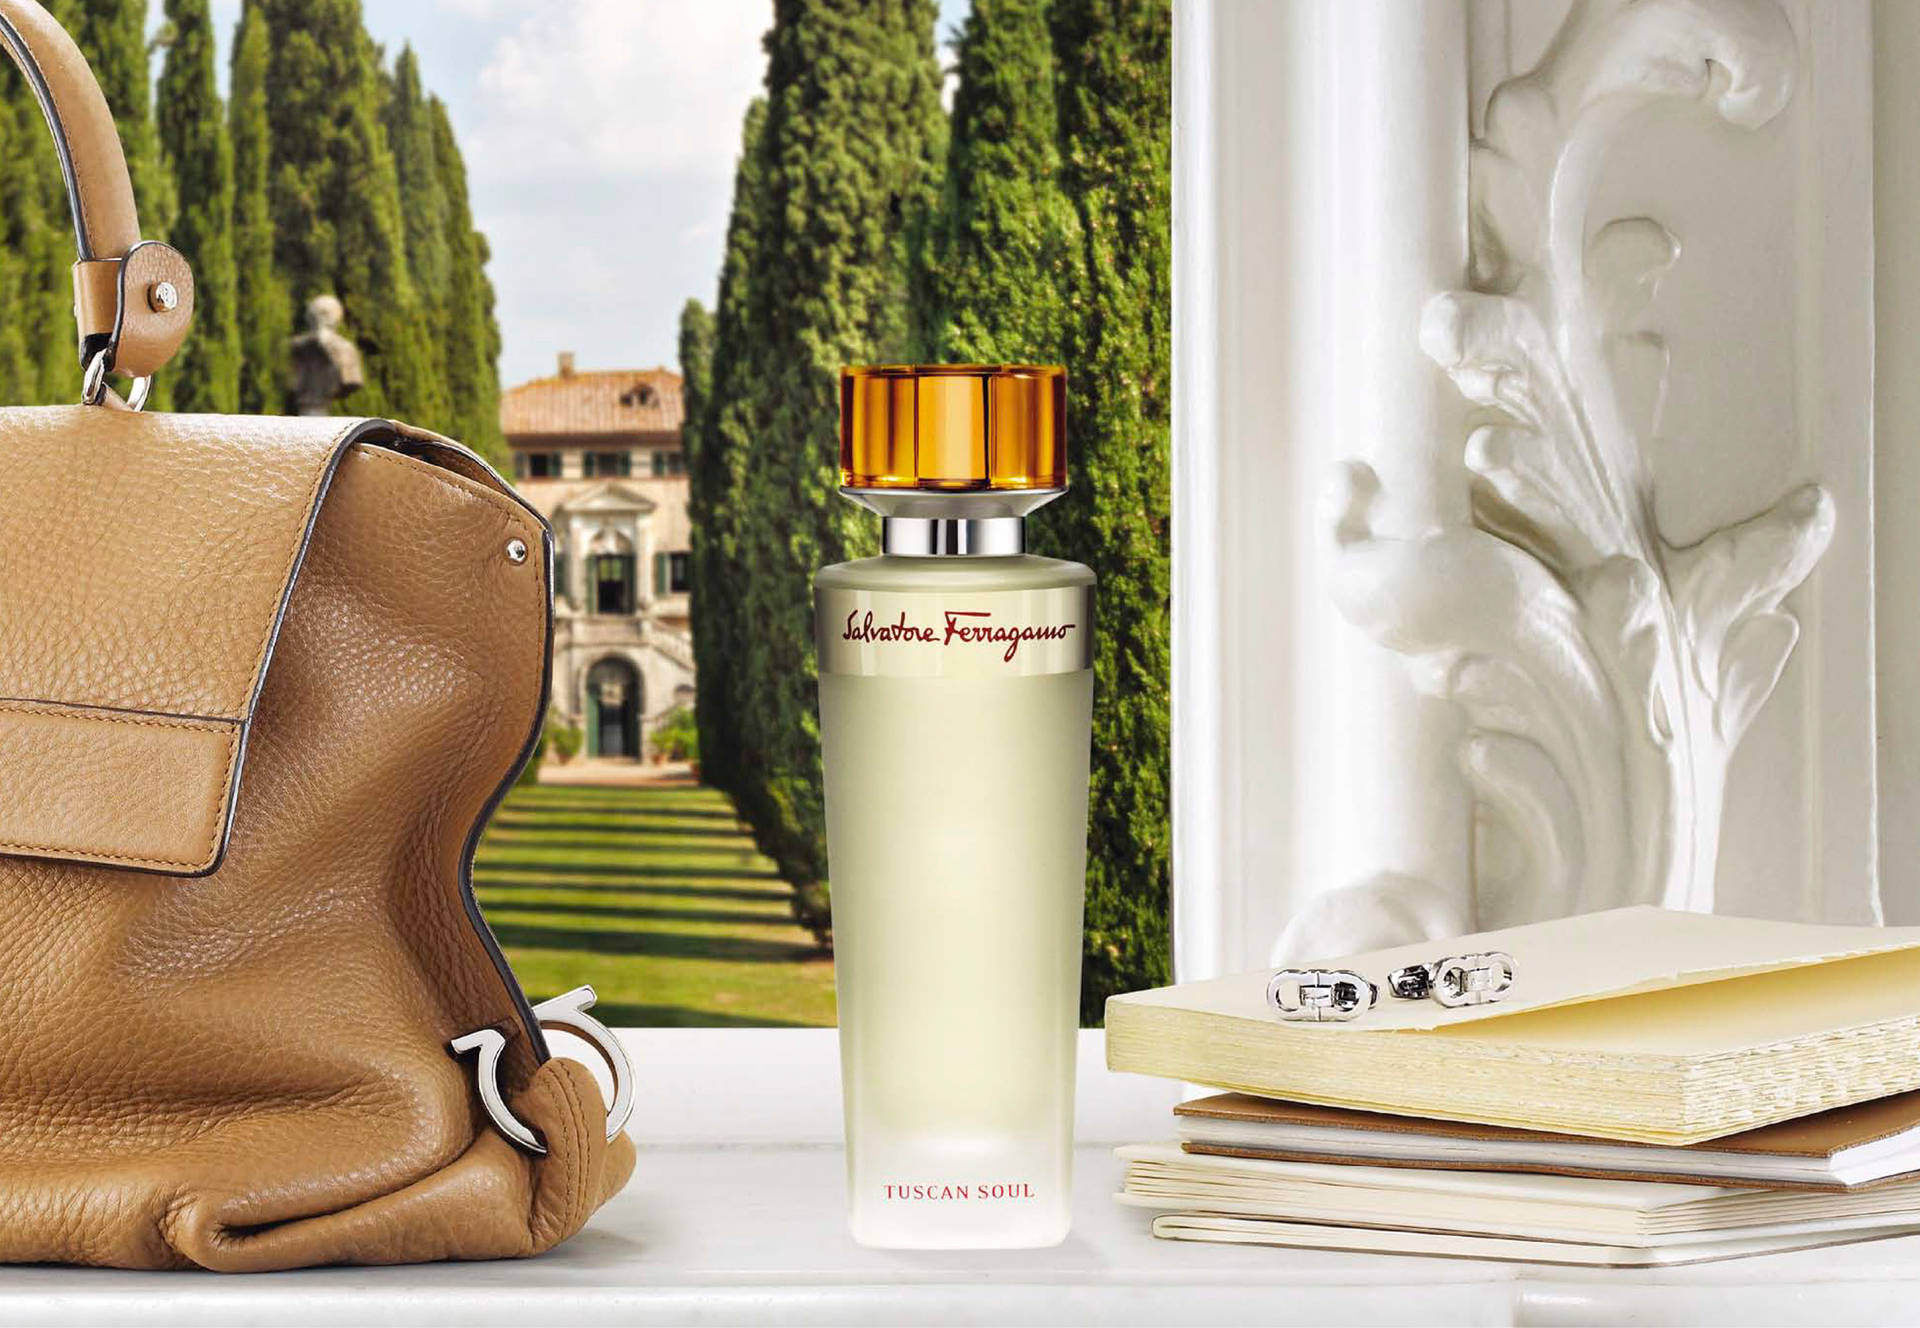 Salvatoreferragamo Tuscan Soul Can Be Translated To 